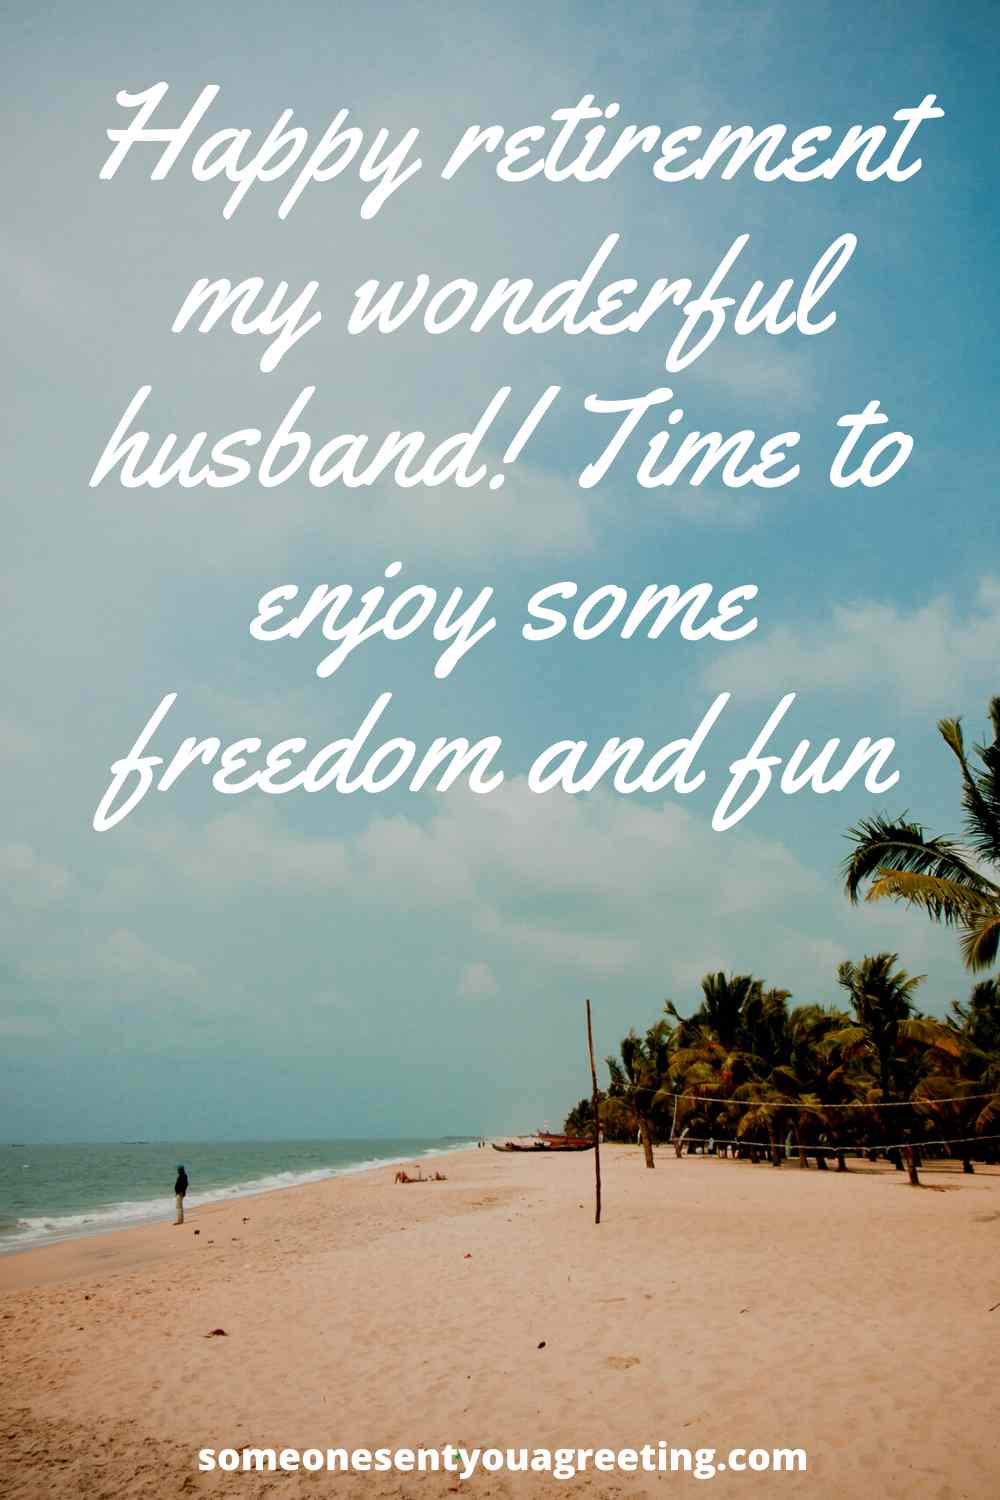 Retirement wishes for a husband